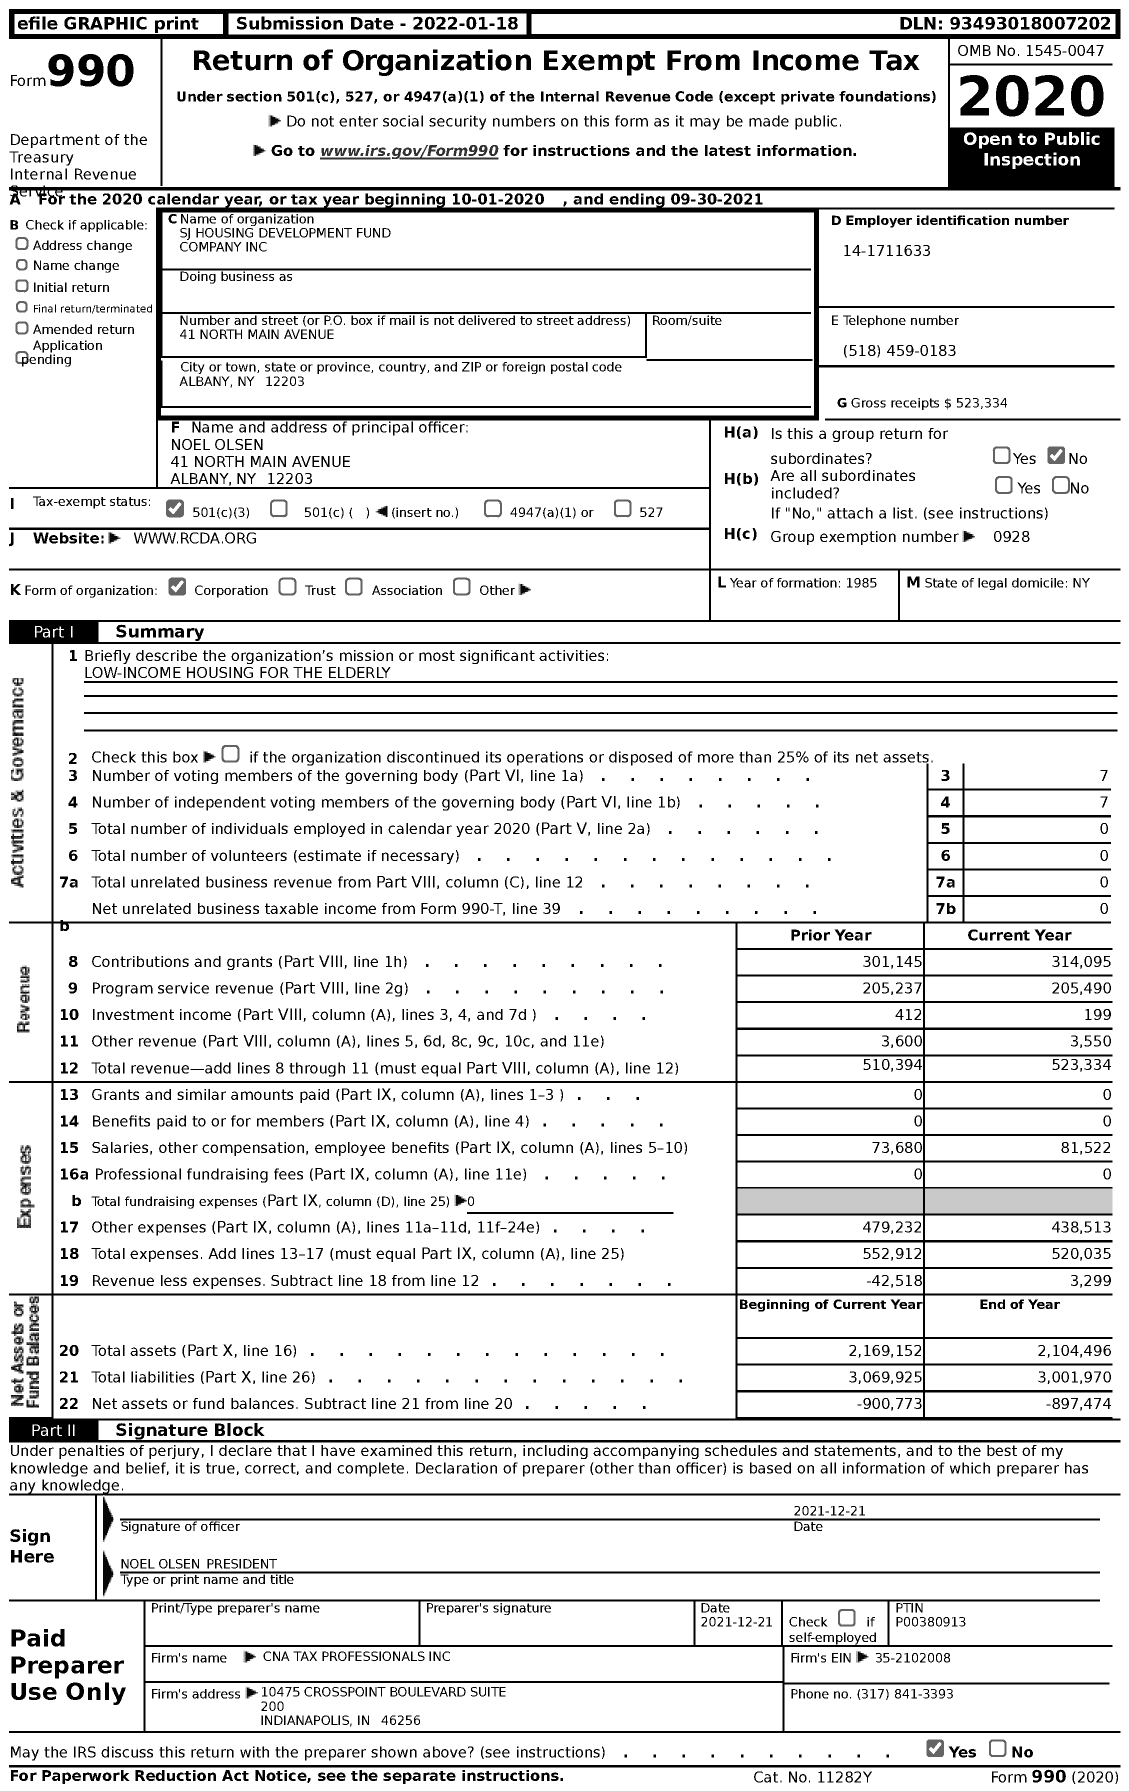 Image of first page of 2020 Form 990 for SJ Housing Development Fund Company